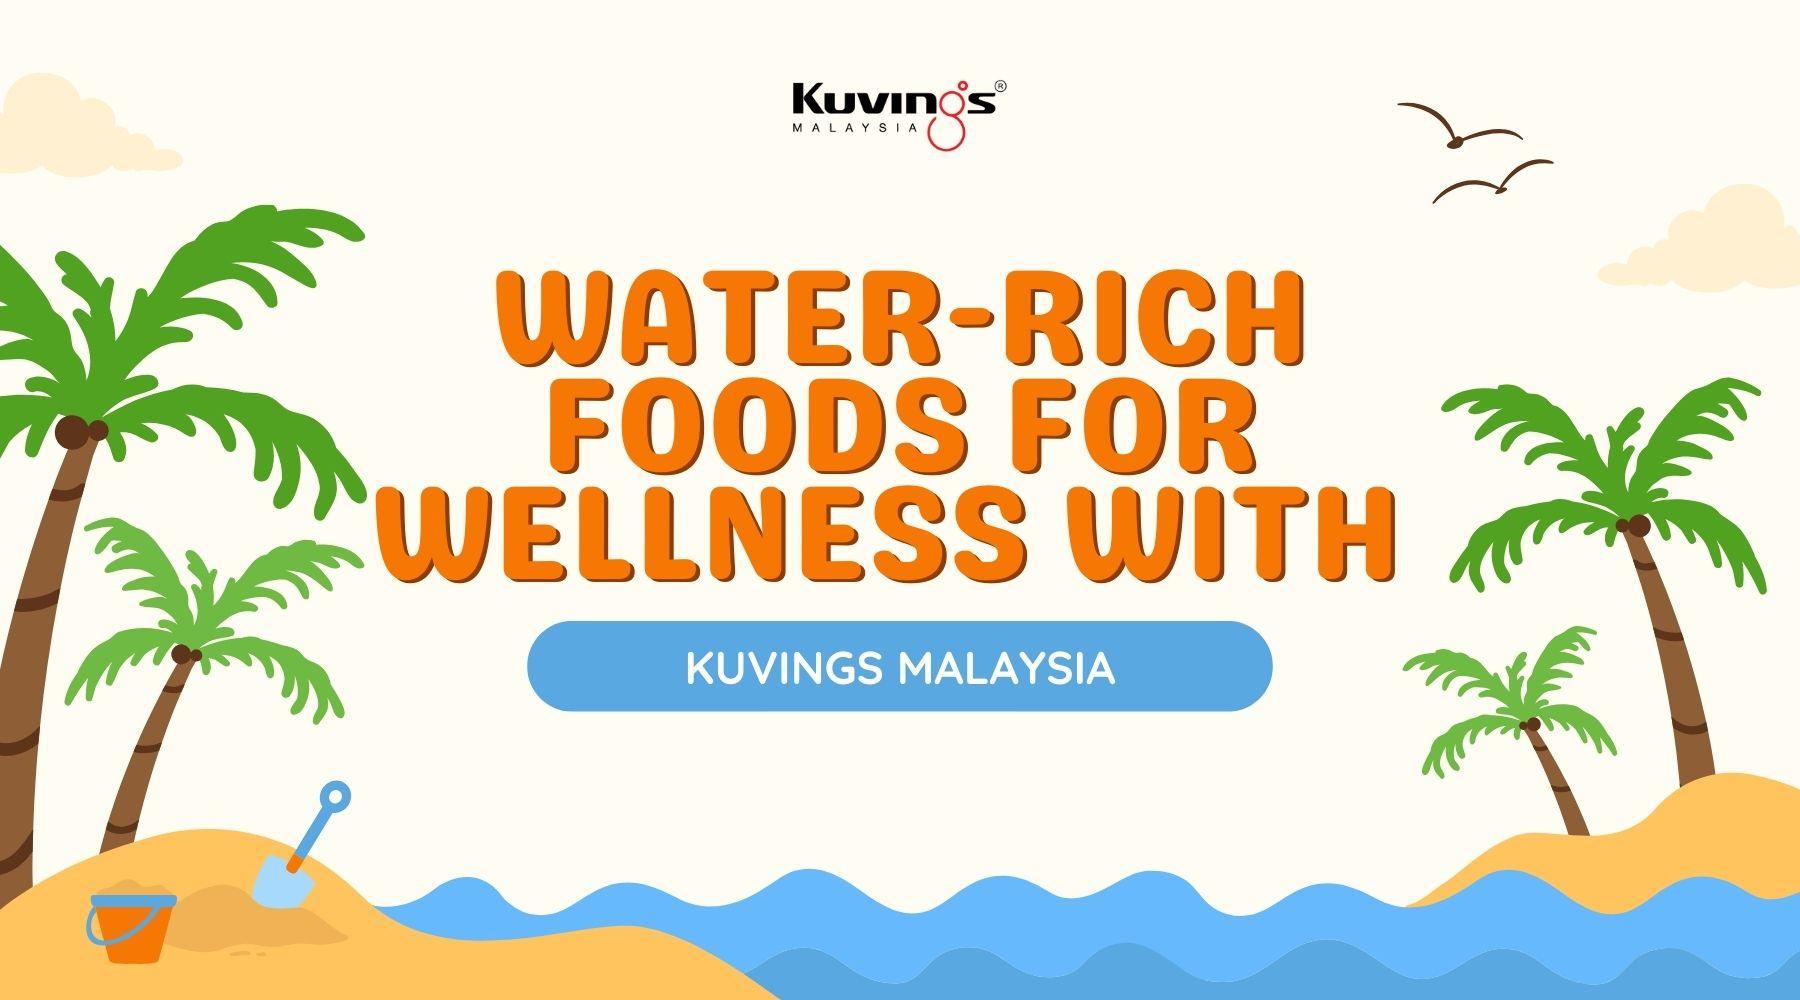 Water-Rich Foods for Wellness with Kuvings Malaysia - Kuvings.my